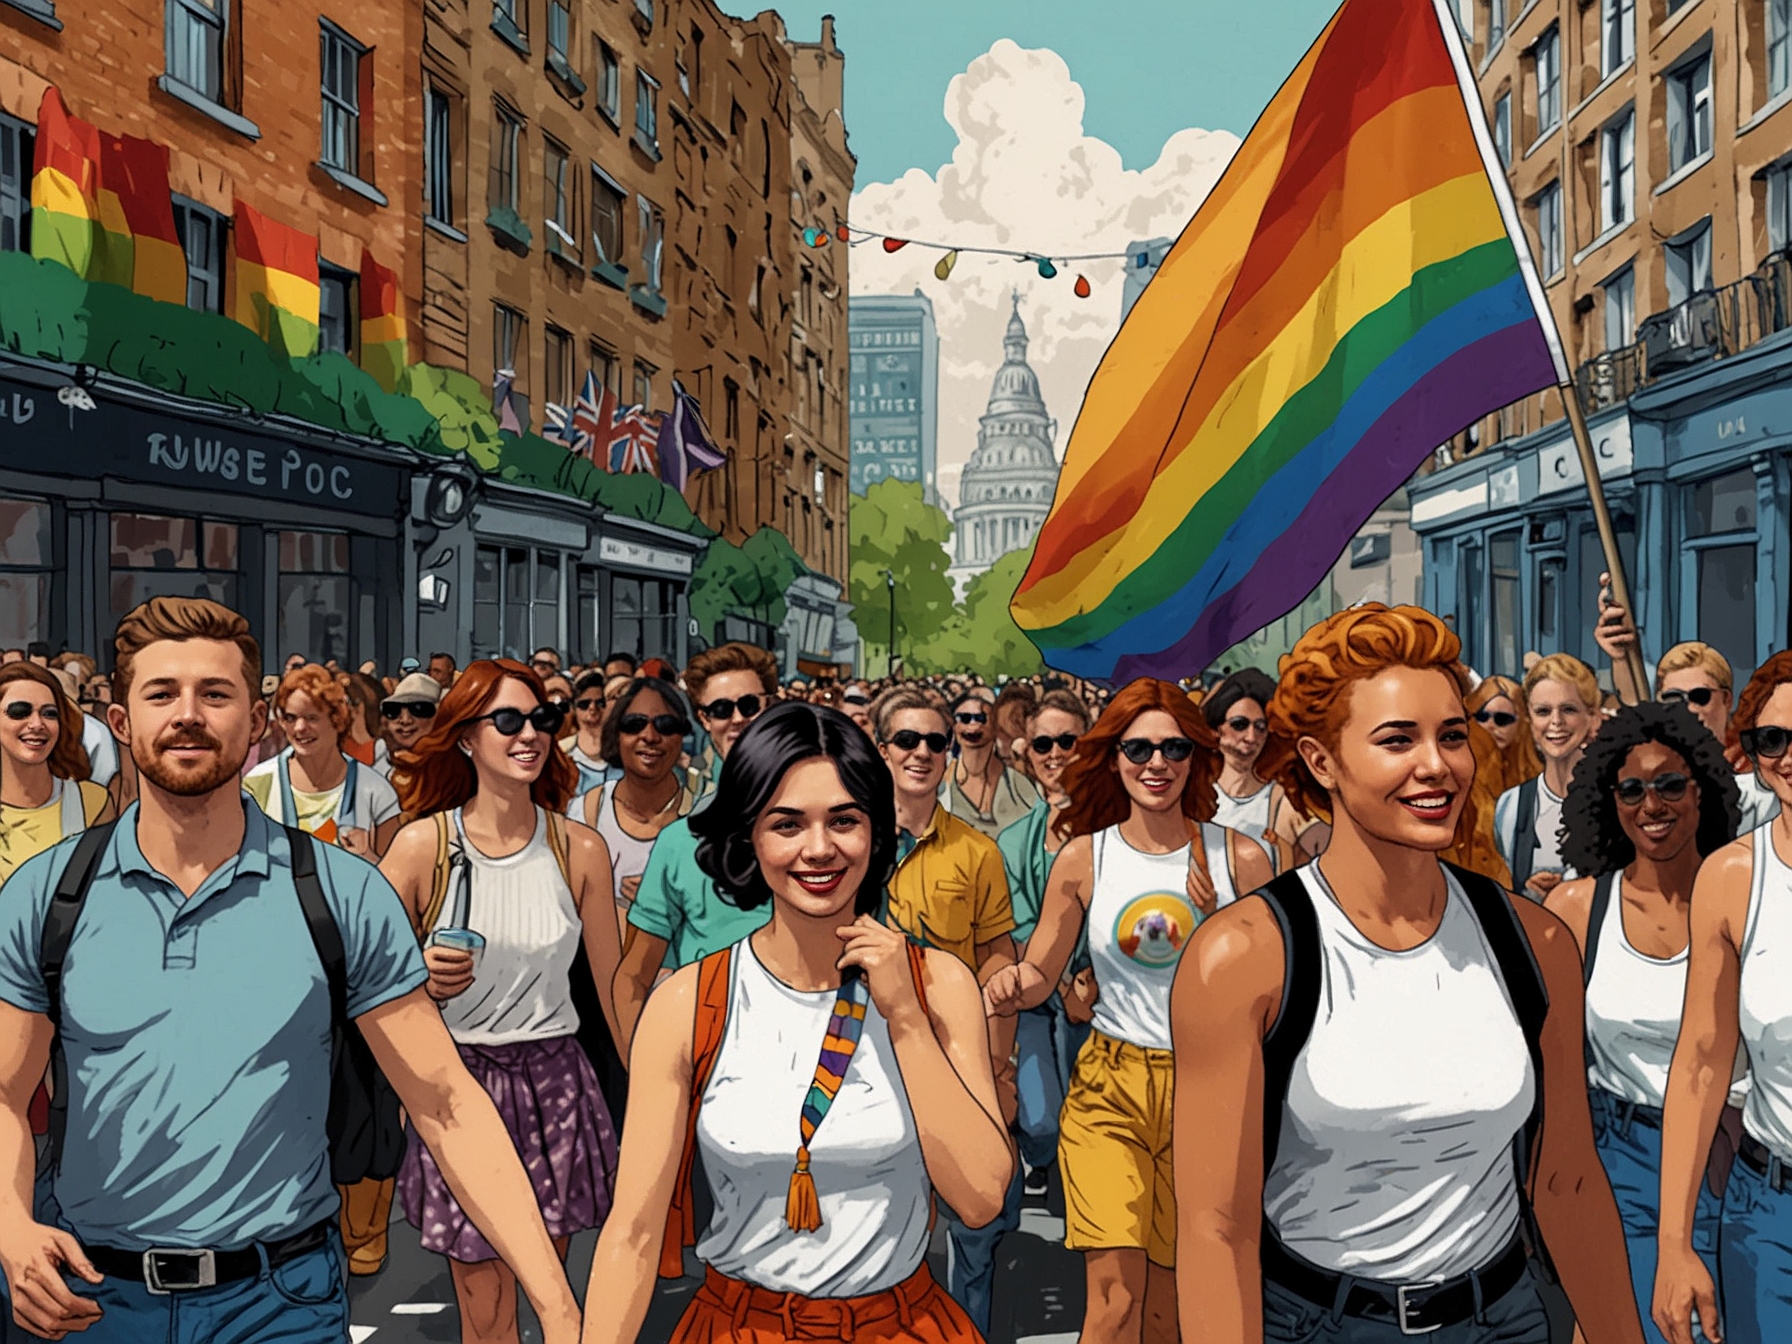 A colorful parade with participants in vibrant costumes and rainbow flags marching through the streets of London, symbolizing the unity and diversity of the LGBTQ+ community.